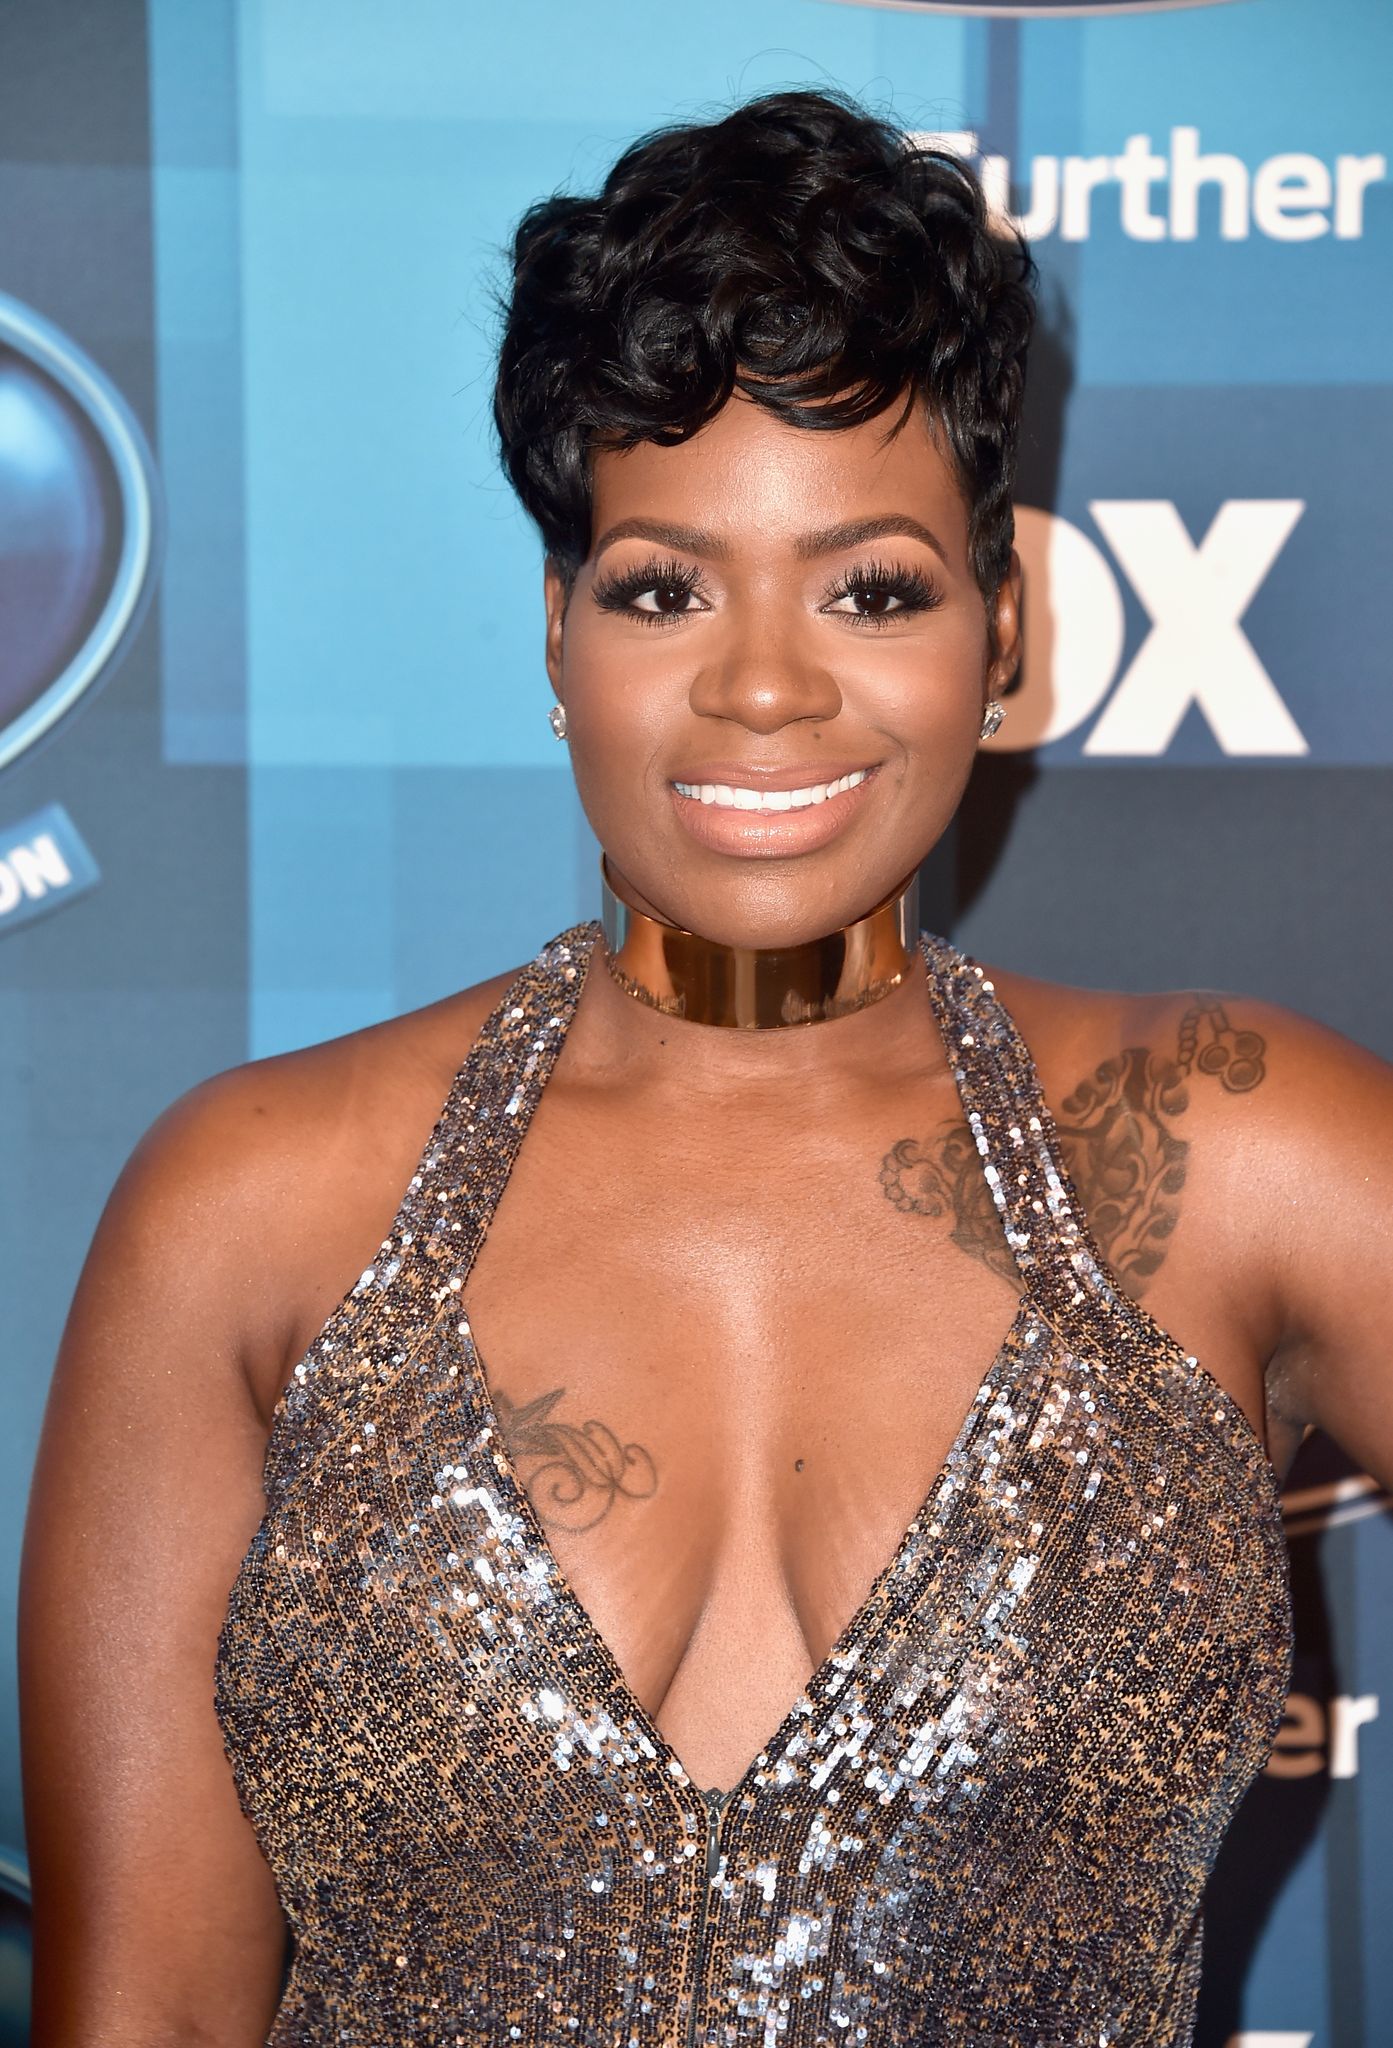 Fantasia at the finale of "American Idol" on April 7, 2016 in California. | Photo: Getty Images